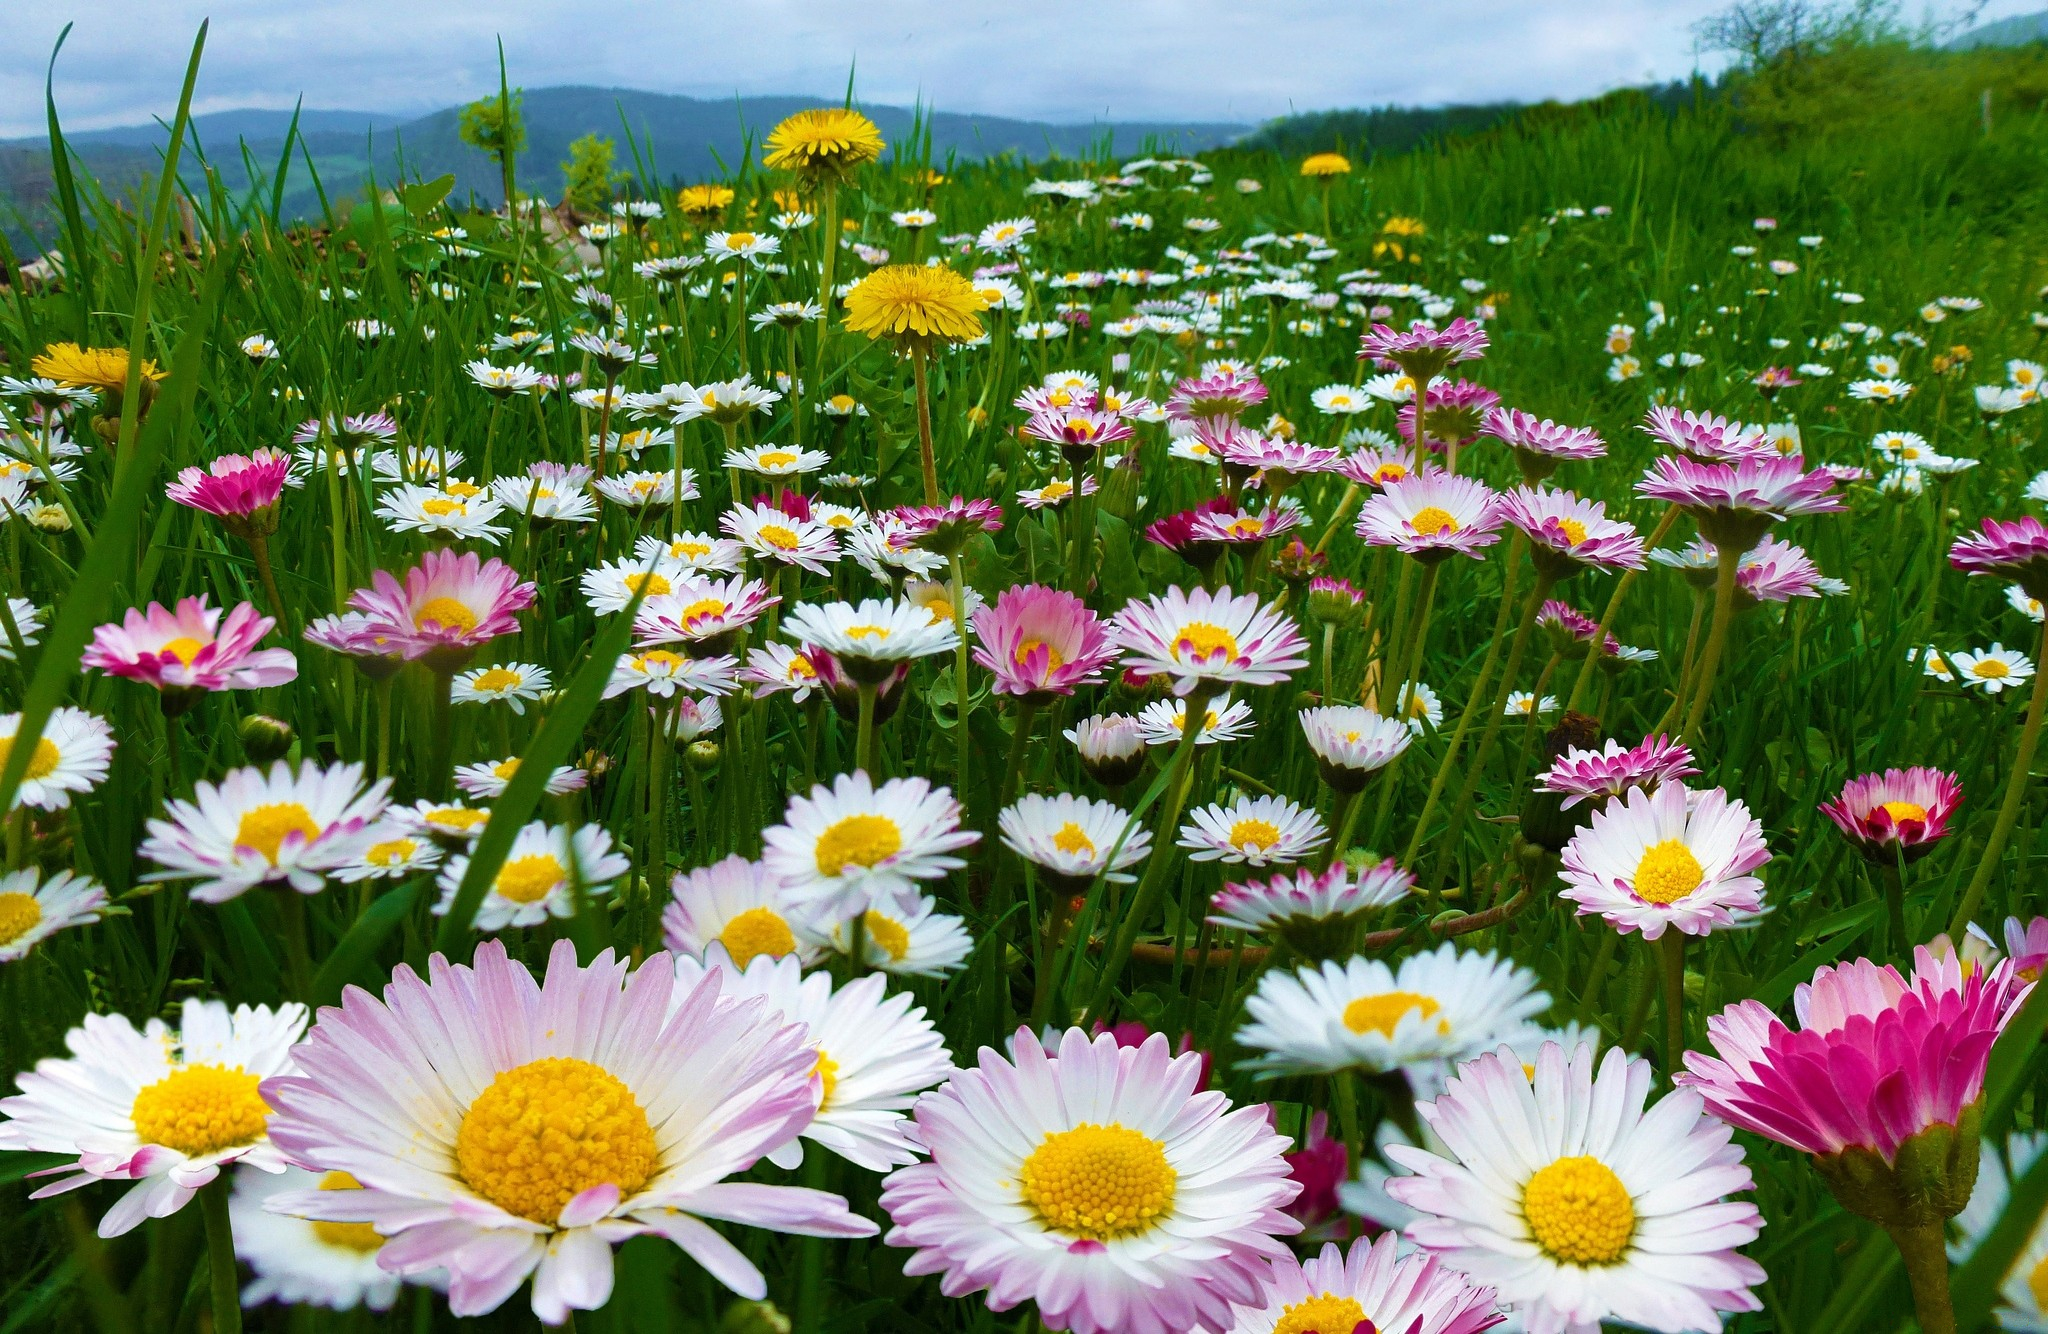 Field Of Daisies Hd Wallpaper Background Image 2048x1334 Id